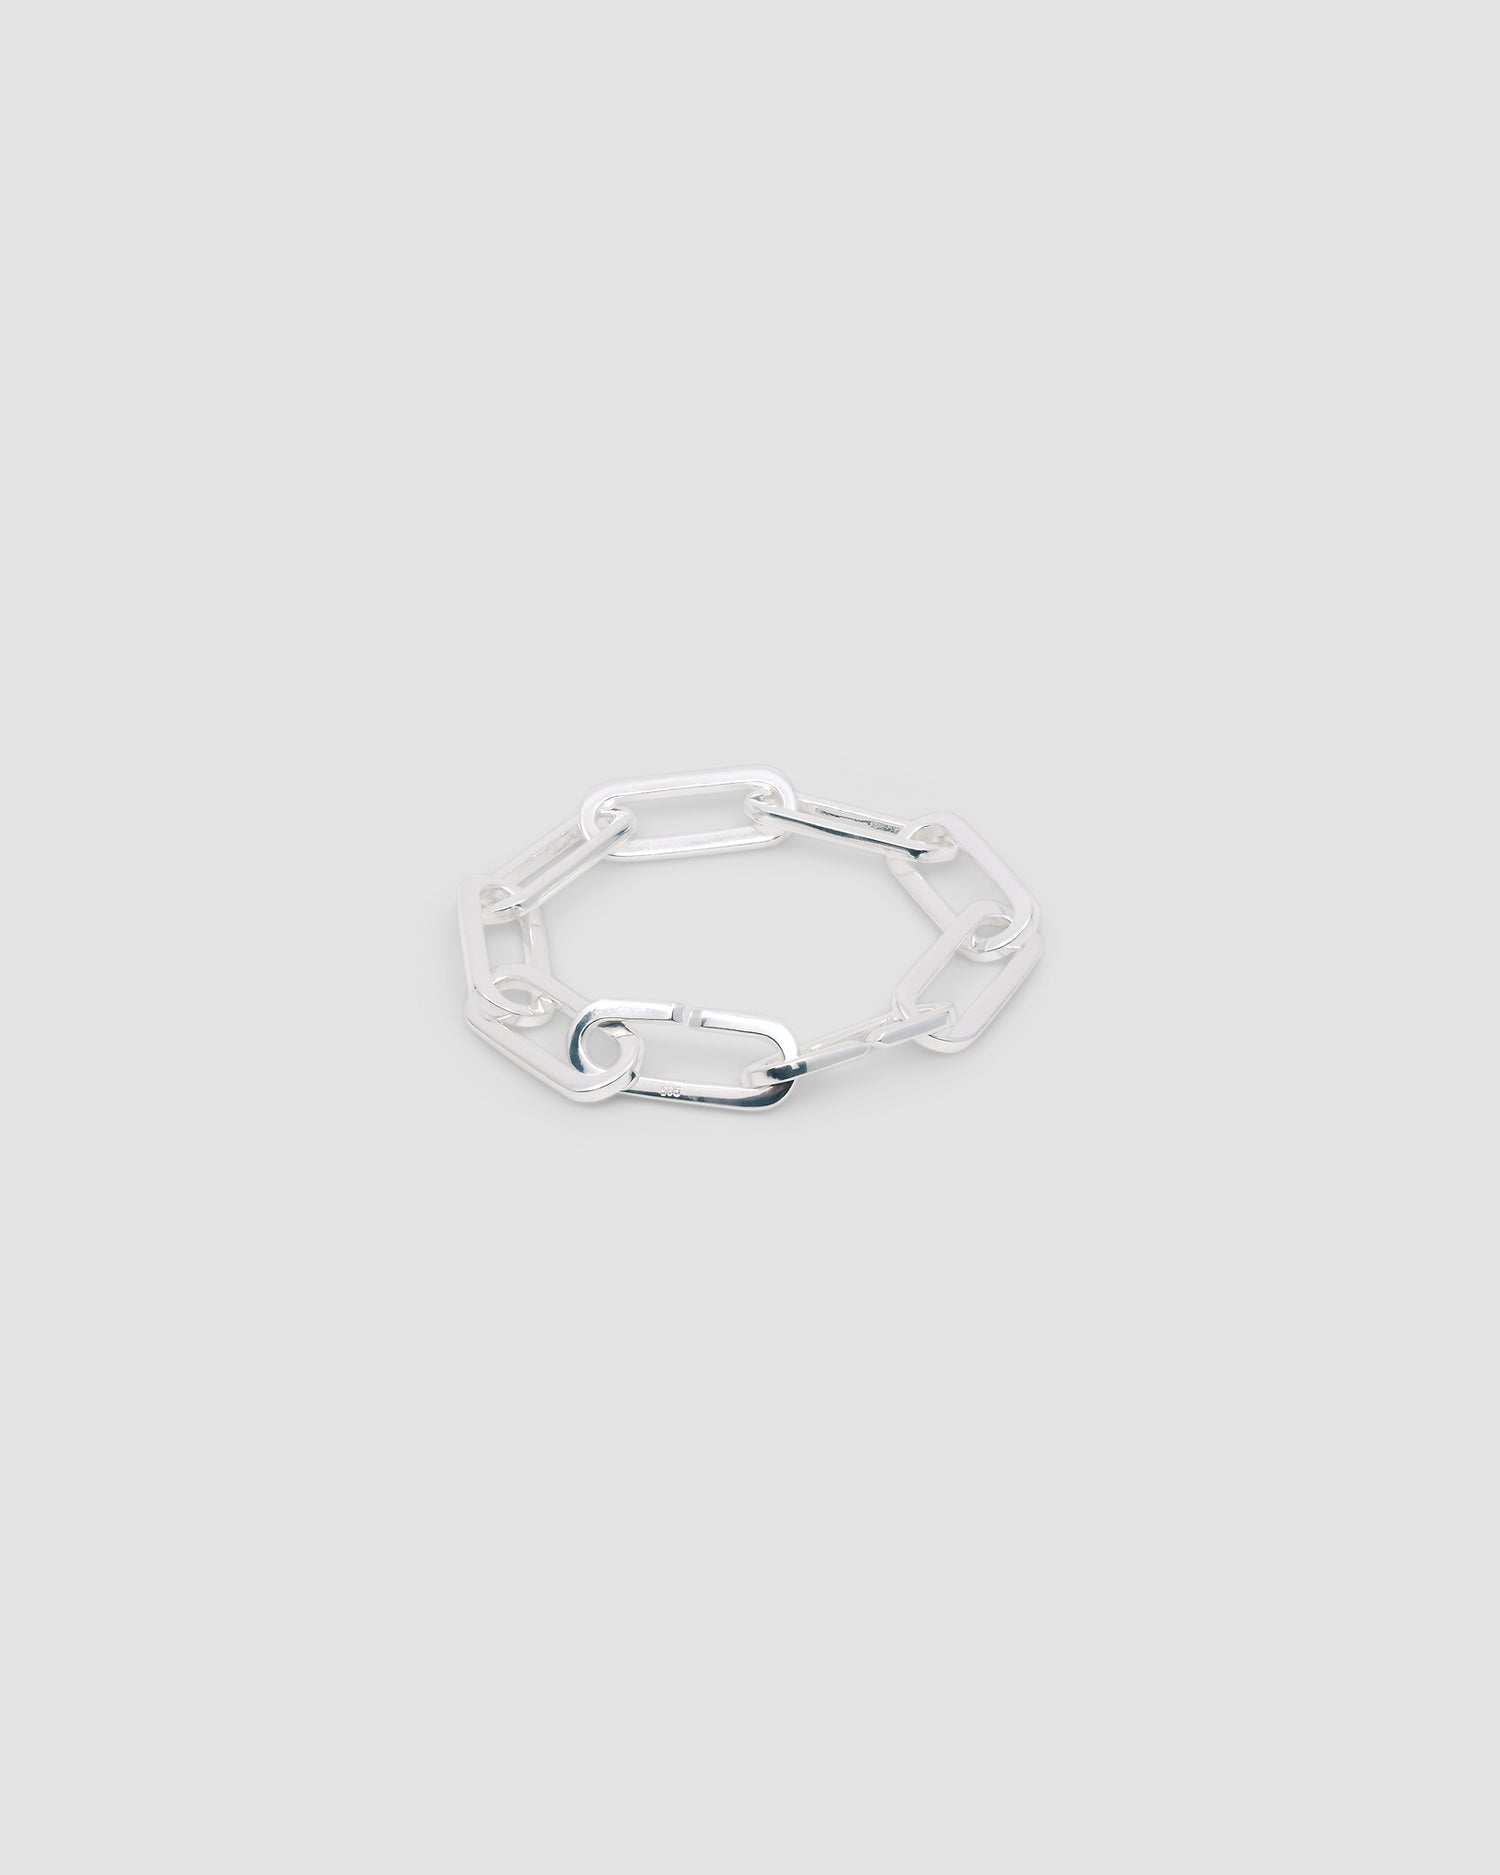 silver open link bracelet with self clasp